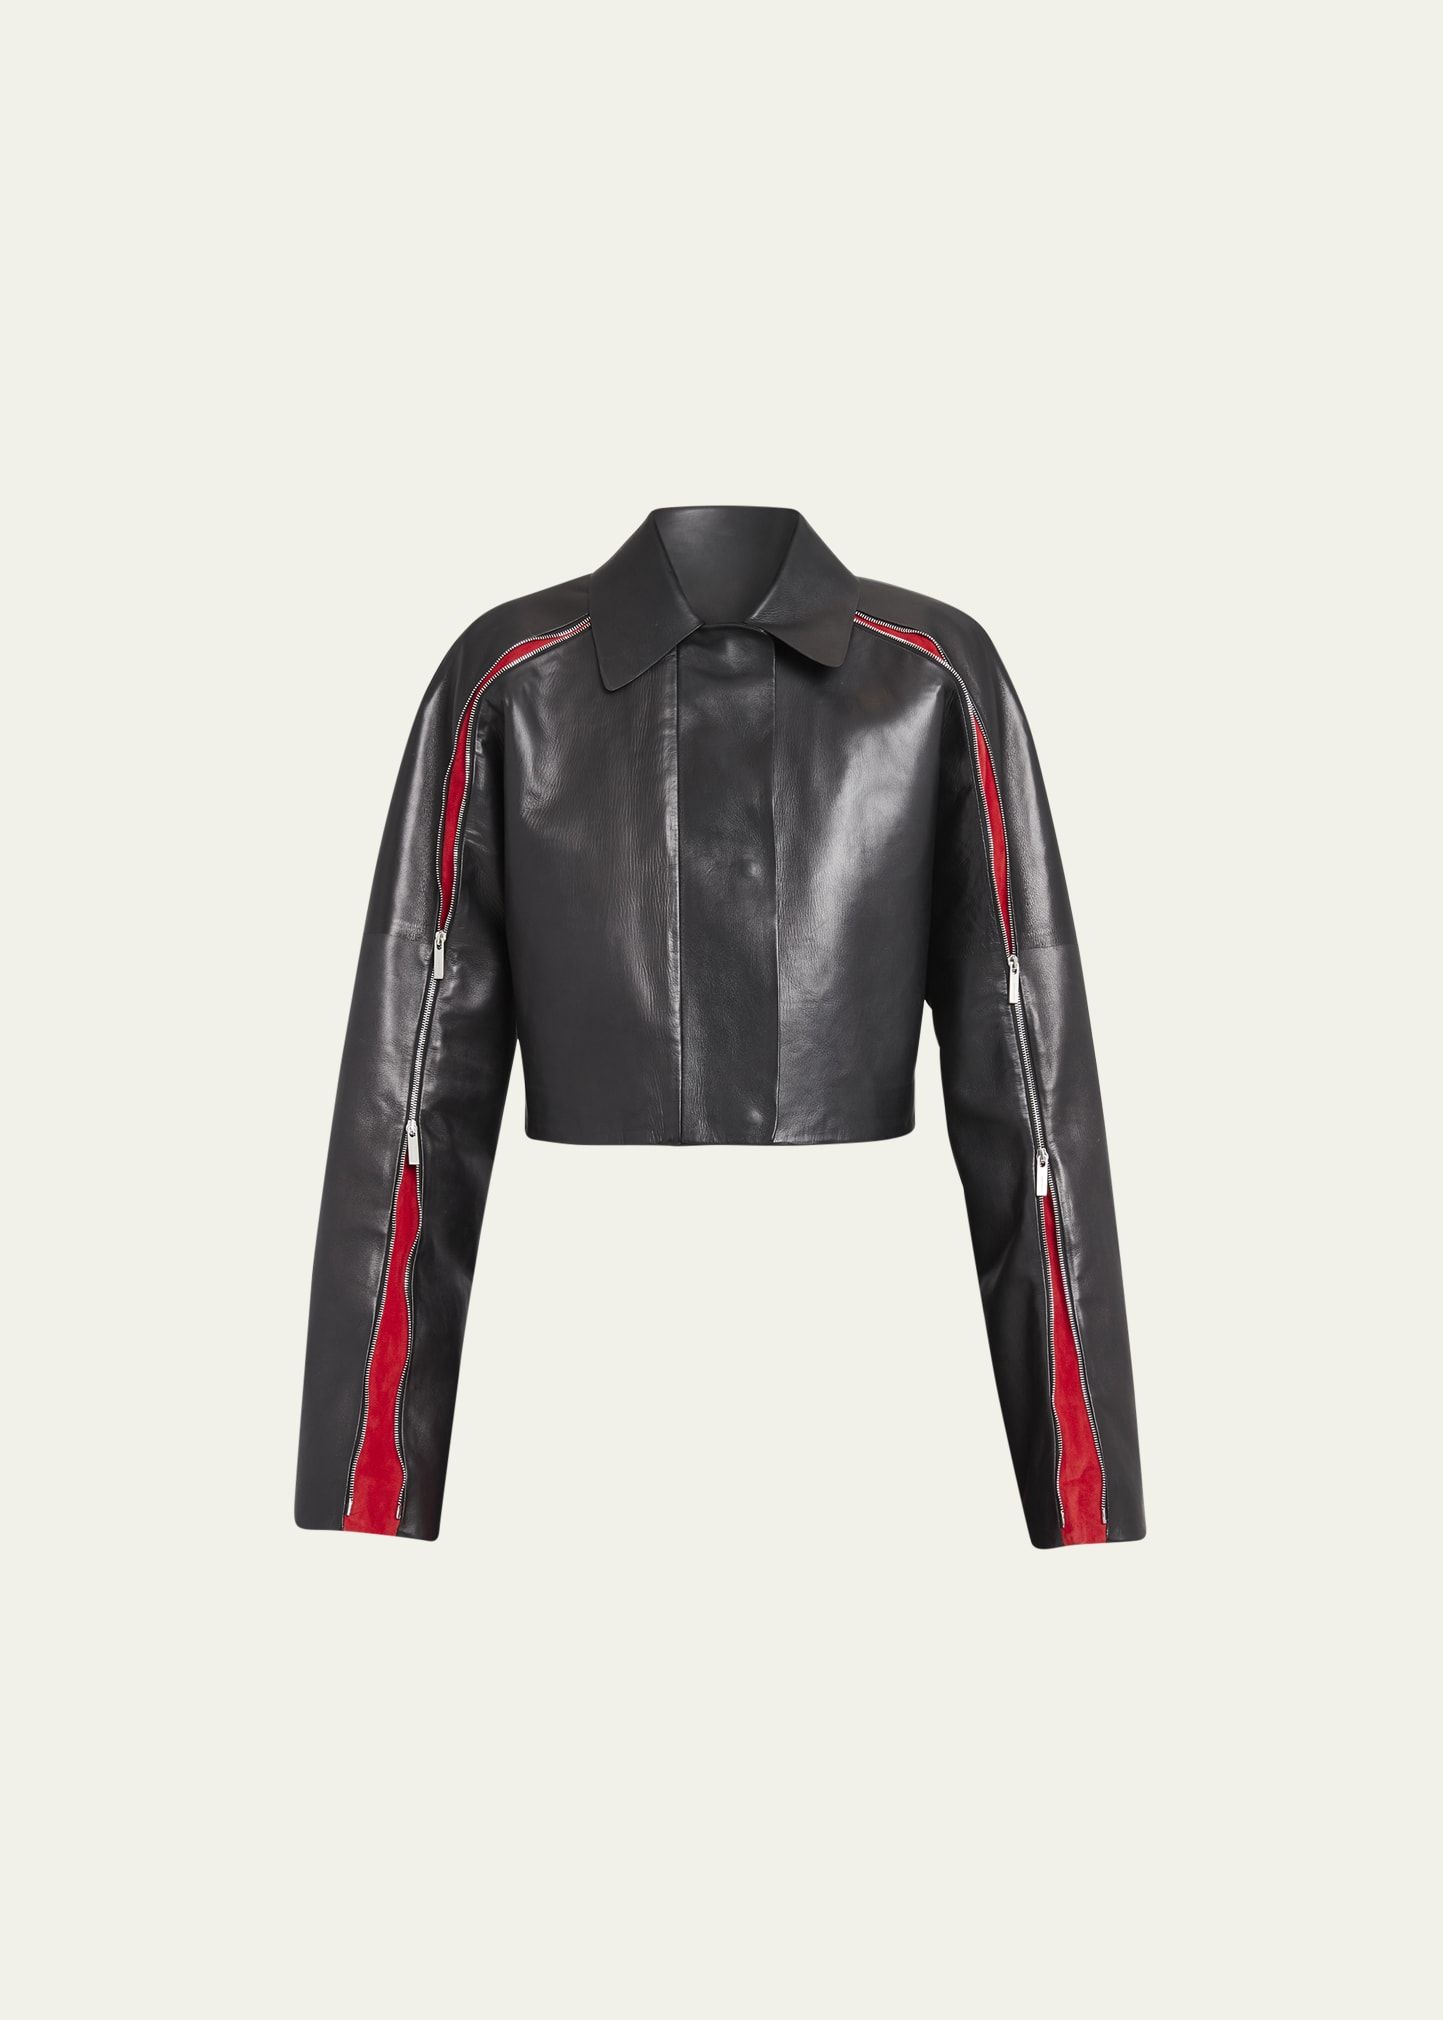 Ferragamo Cropped Leather Moto Jacket with Contrast Zipper Sleeves | Bergdorf Goodman